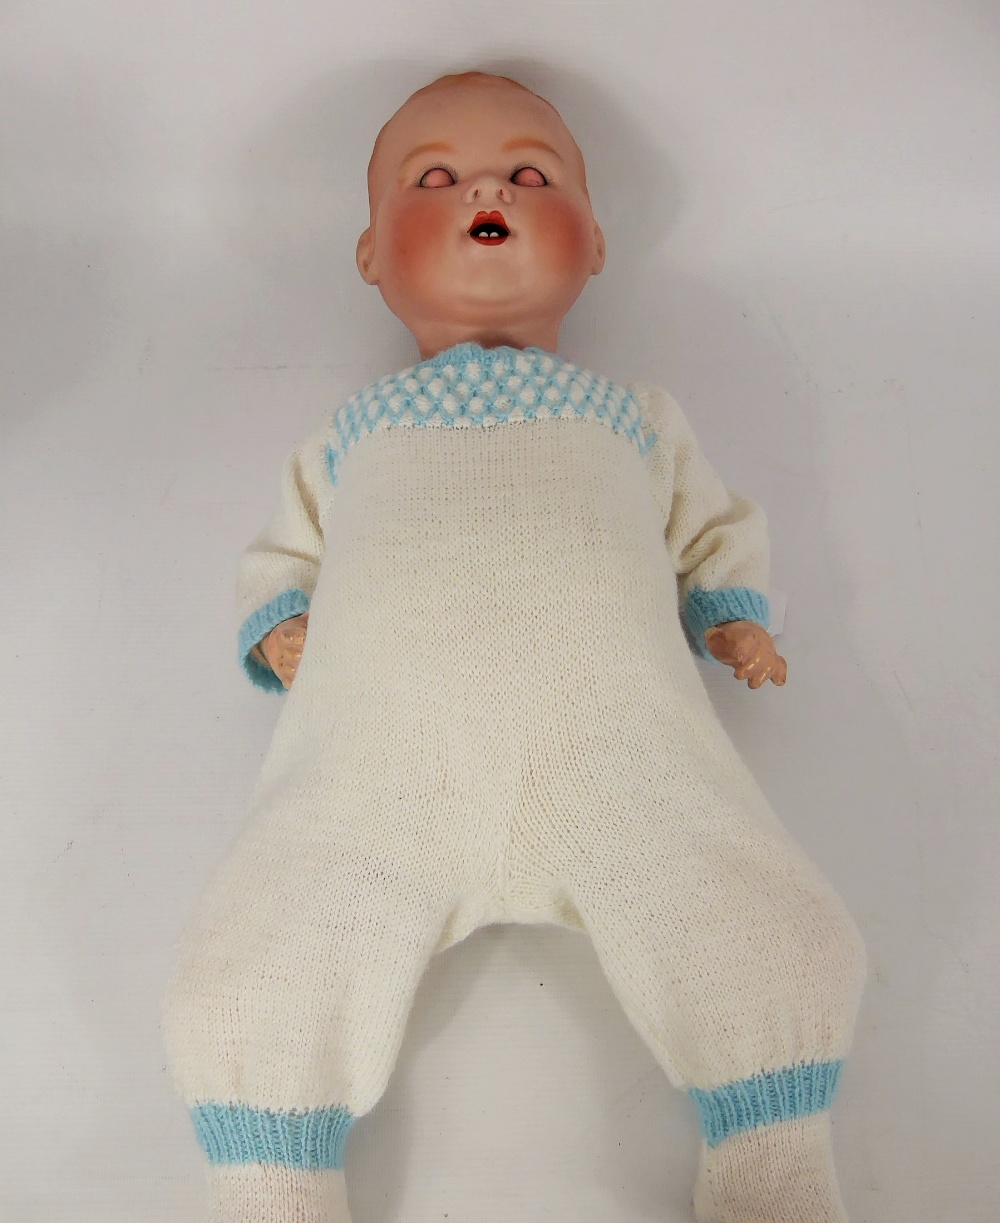 An Antique Armand Marseilles German Bisque-Headed Doll, blue sleeping eyes, open mouth revealing